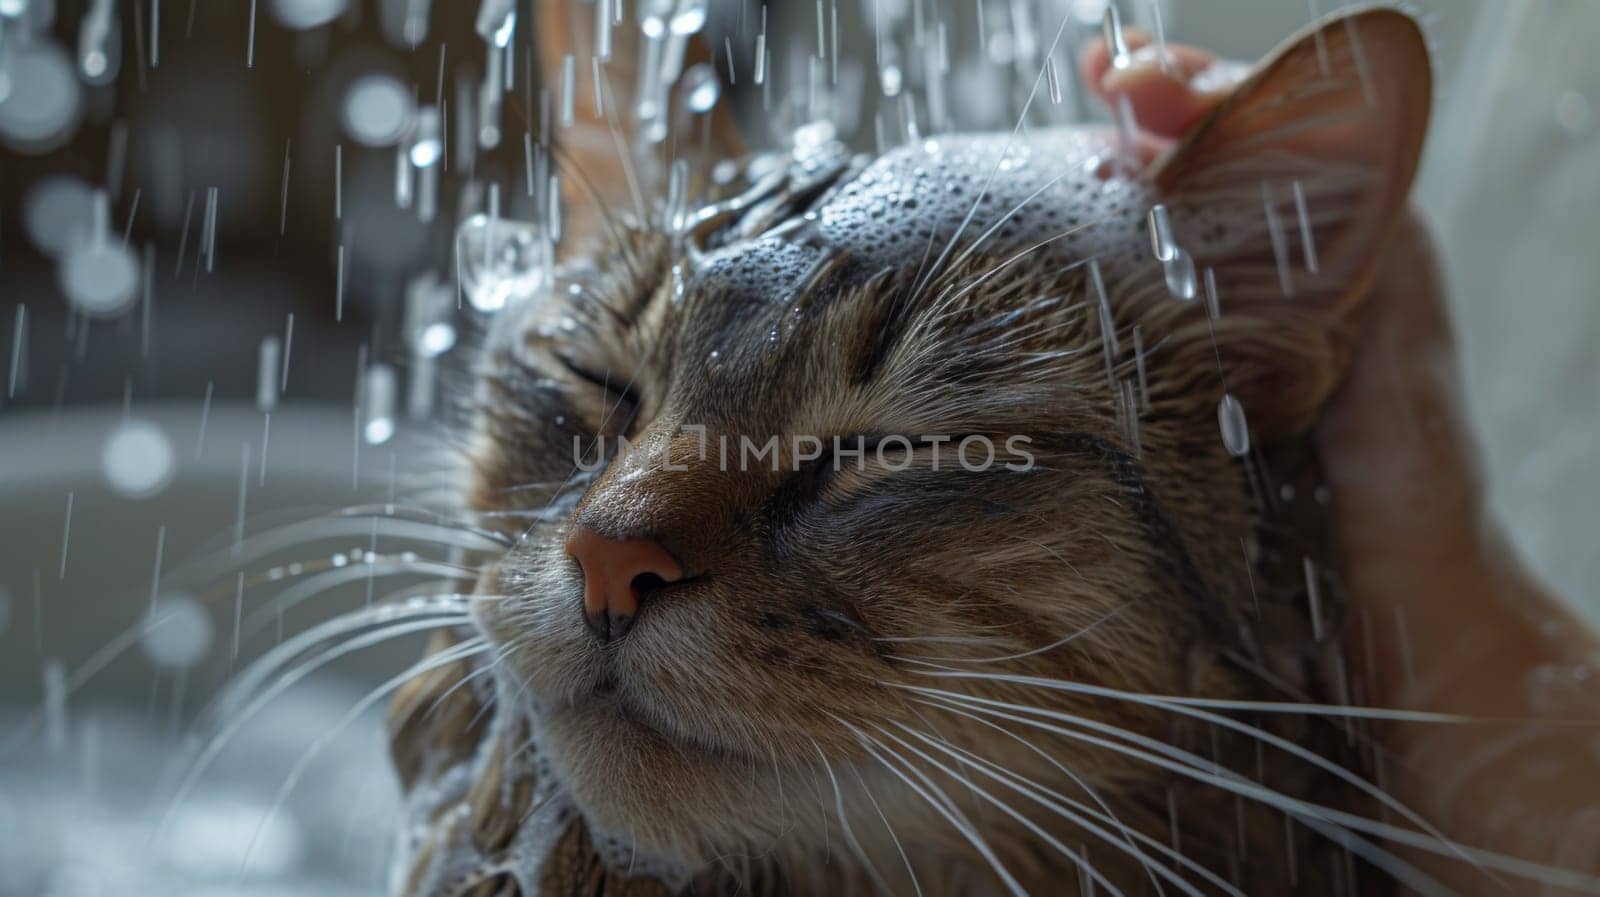 A cat is being washed with a stream of water in the tub